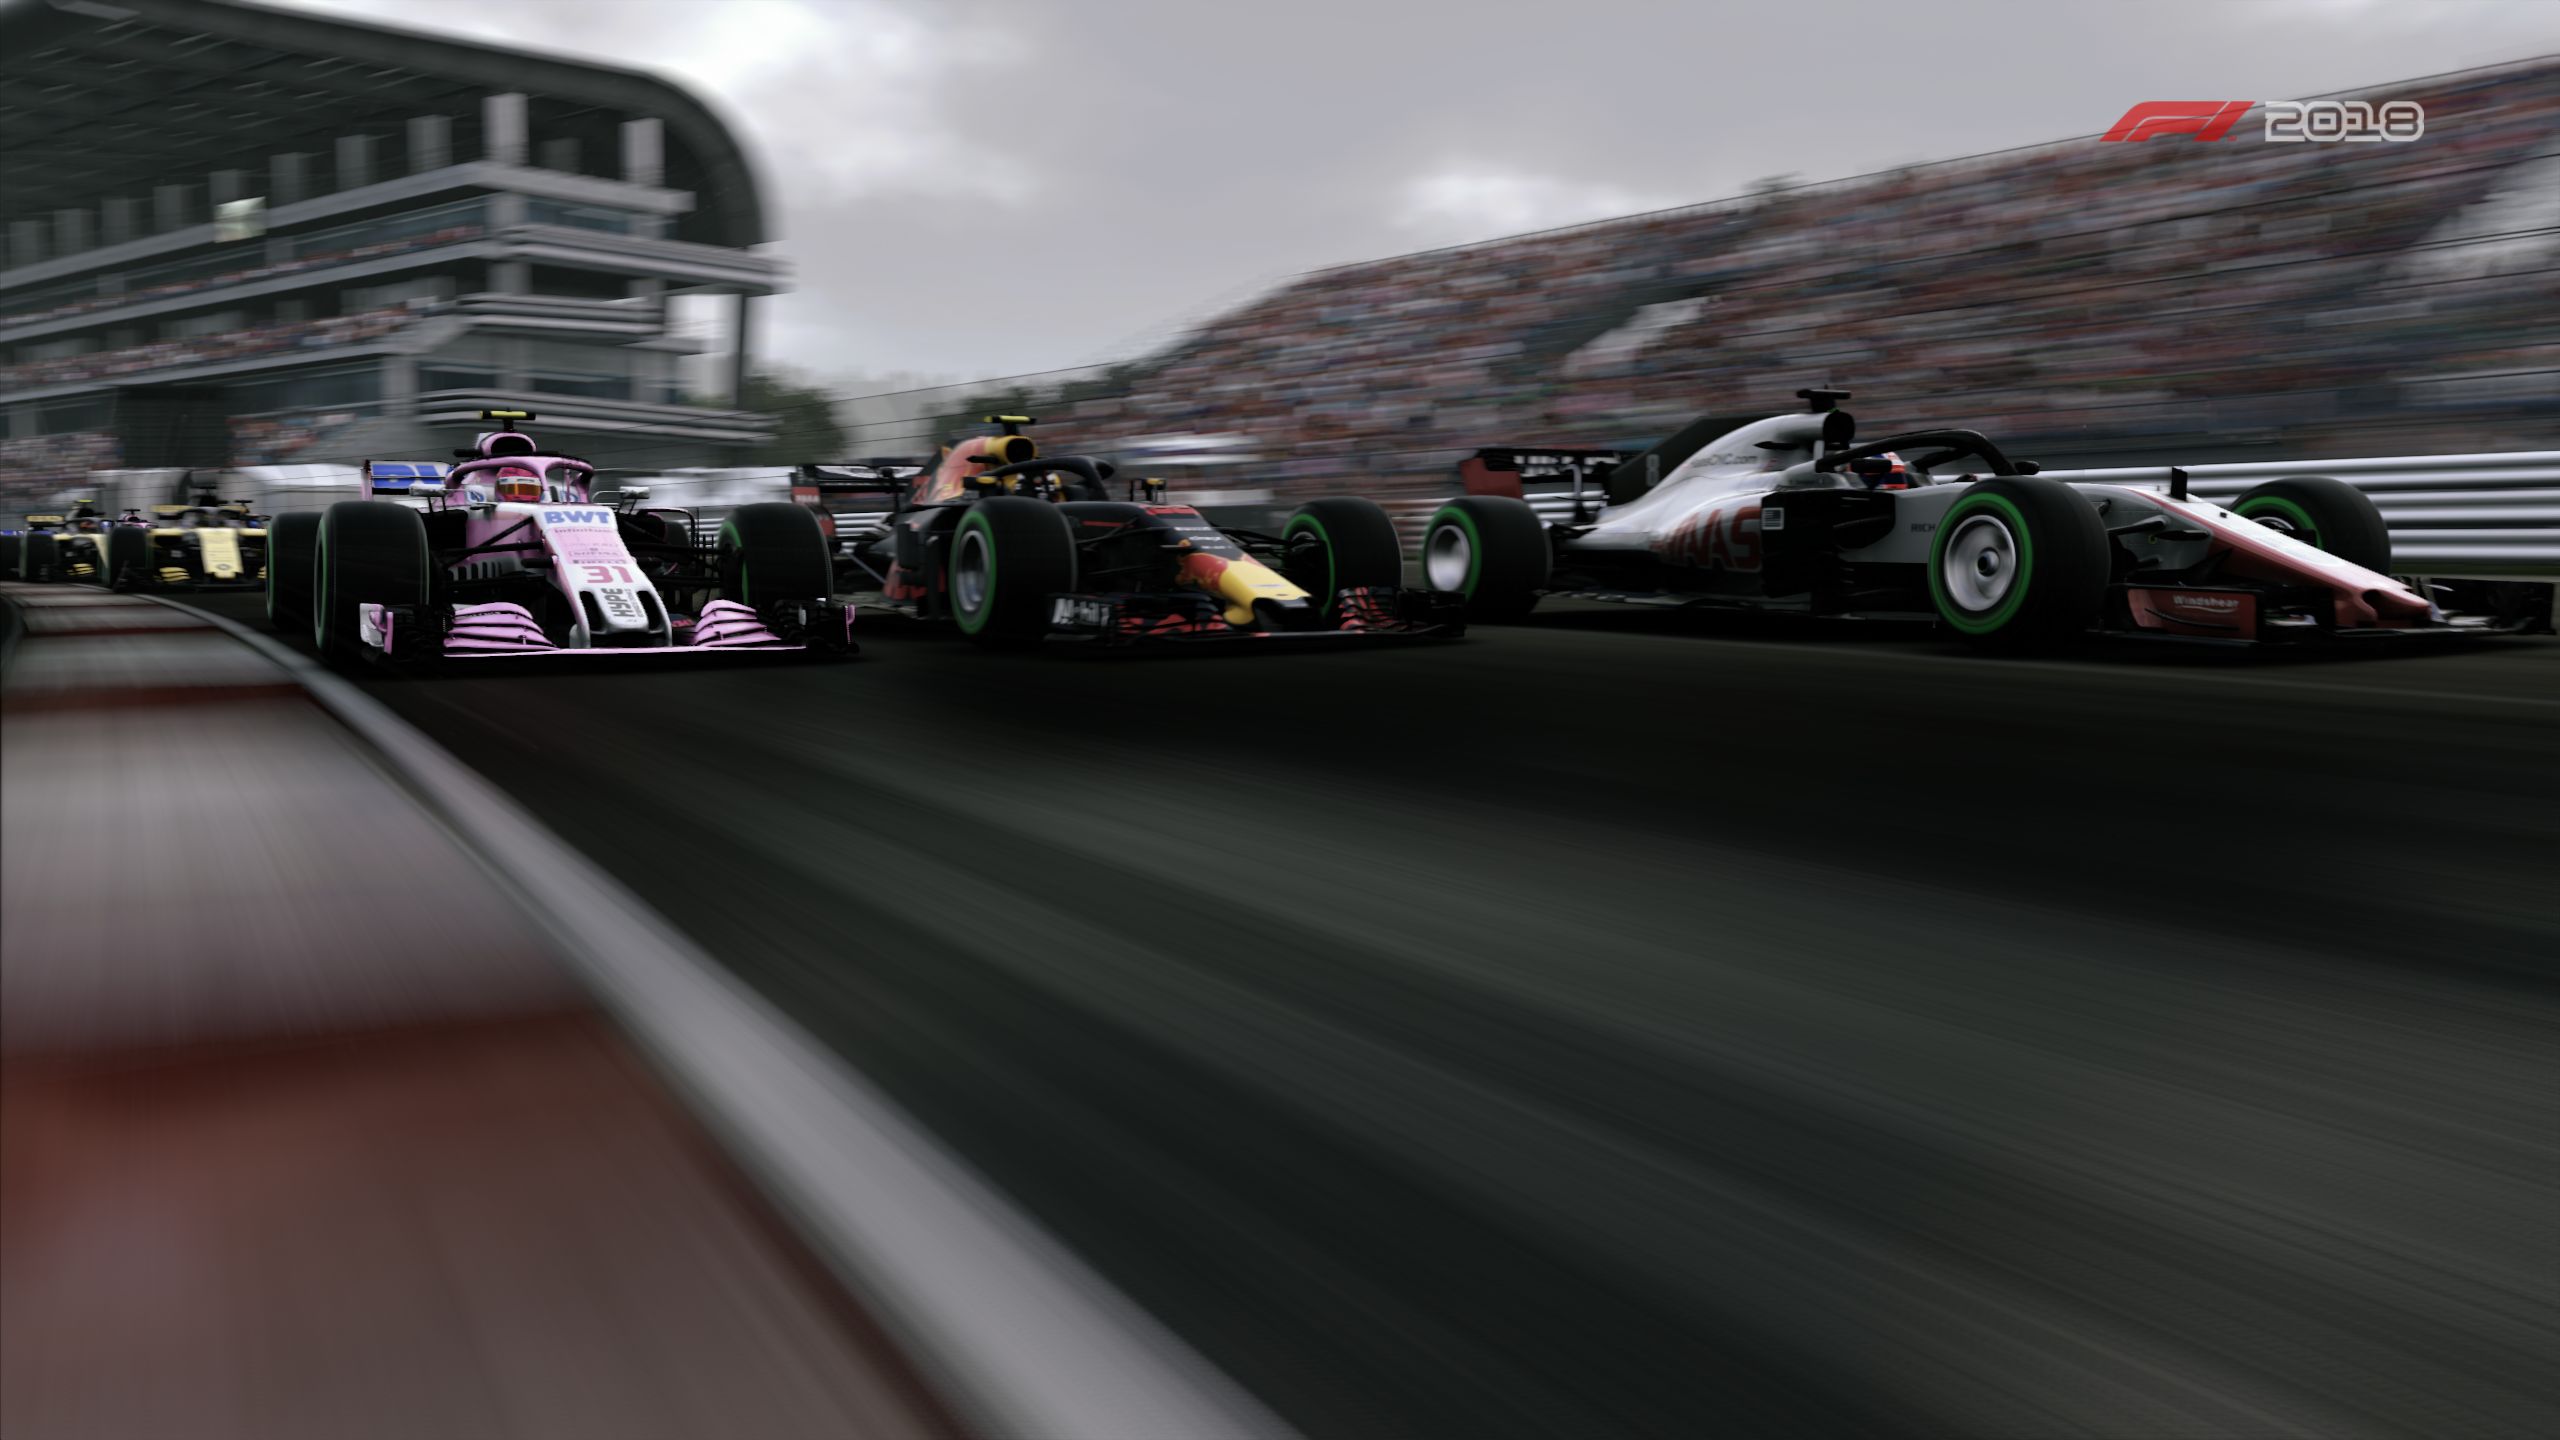 red bull, video game, f1 2018, force india vjm11, force india, formula 1, haas f1 team, haas vf 18, red bull rb14, vehicle